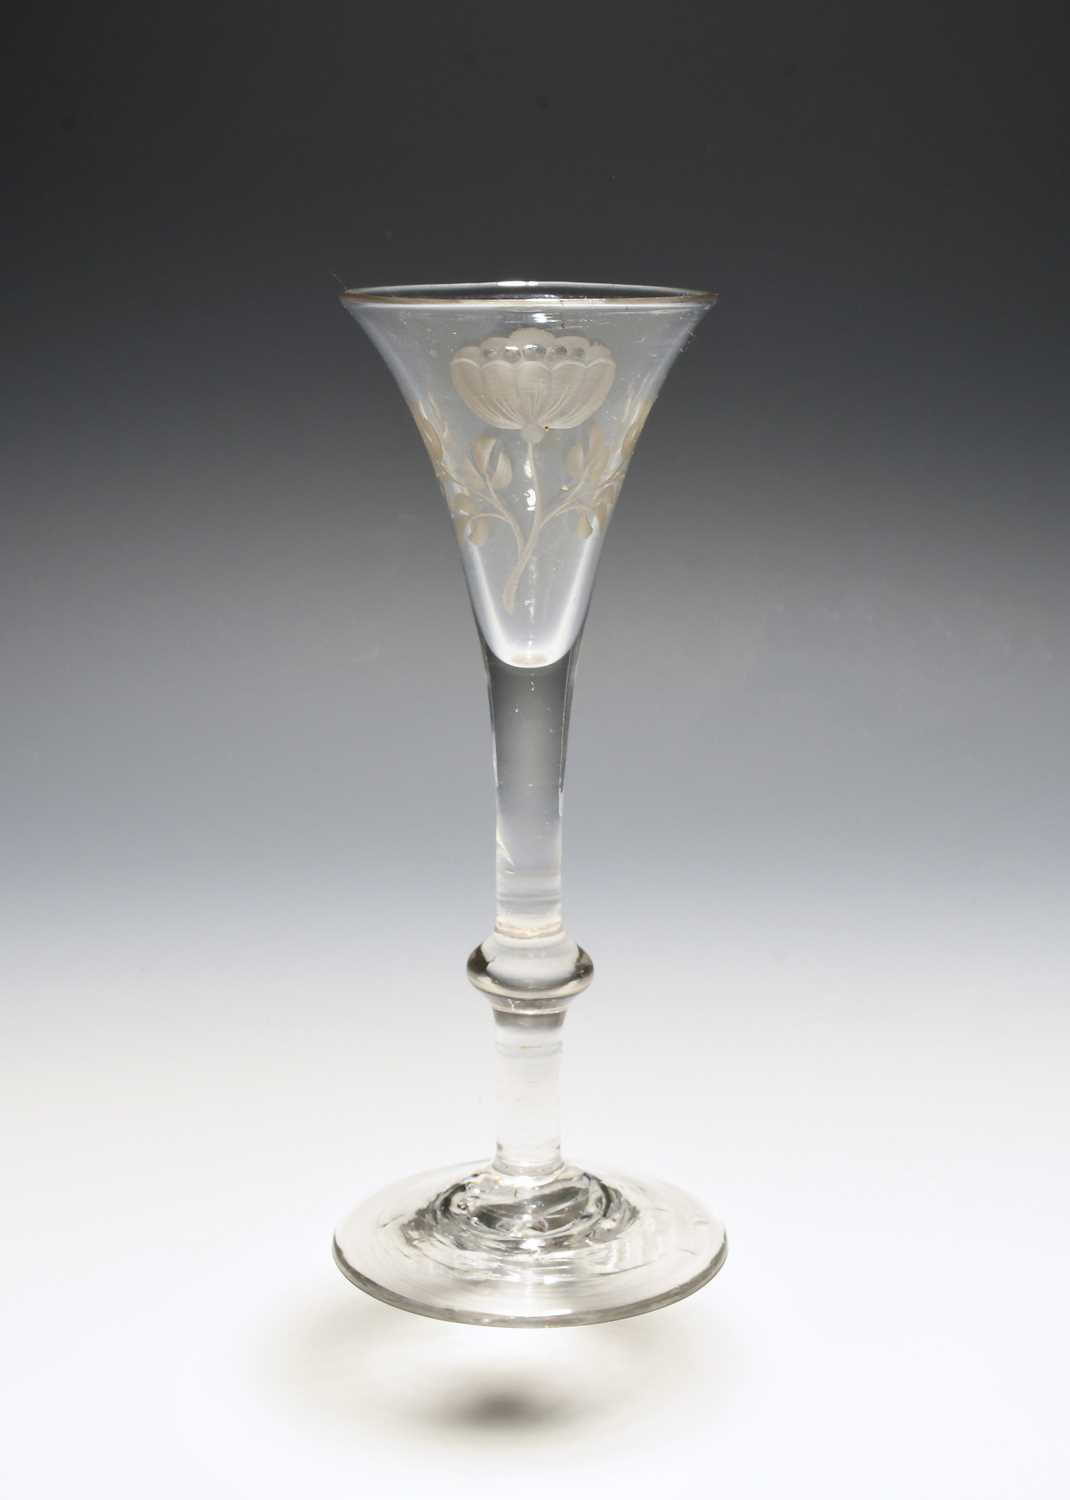 An unusual wine glass of possible Jacobite significance, c.1760, the drawn trumpet bowl engraved